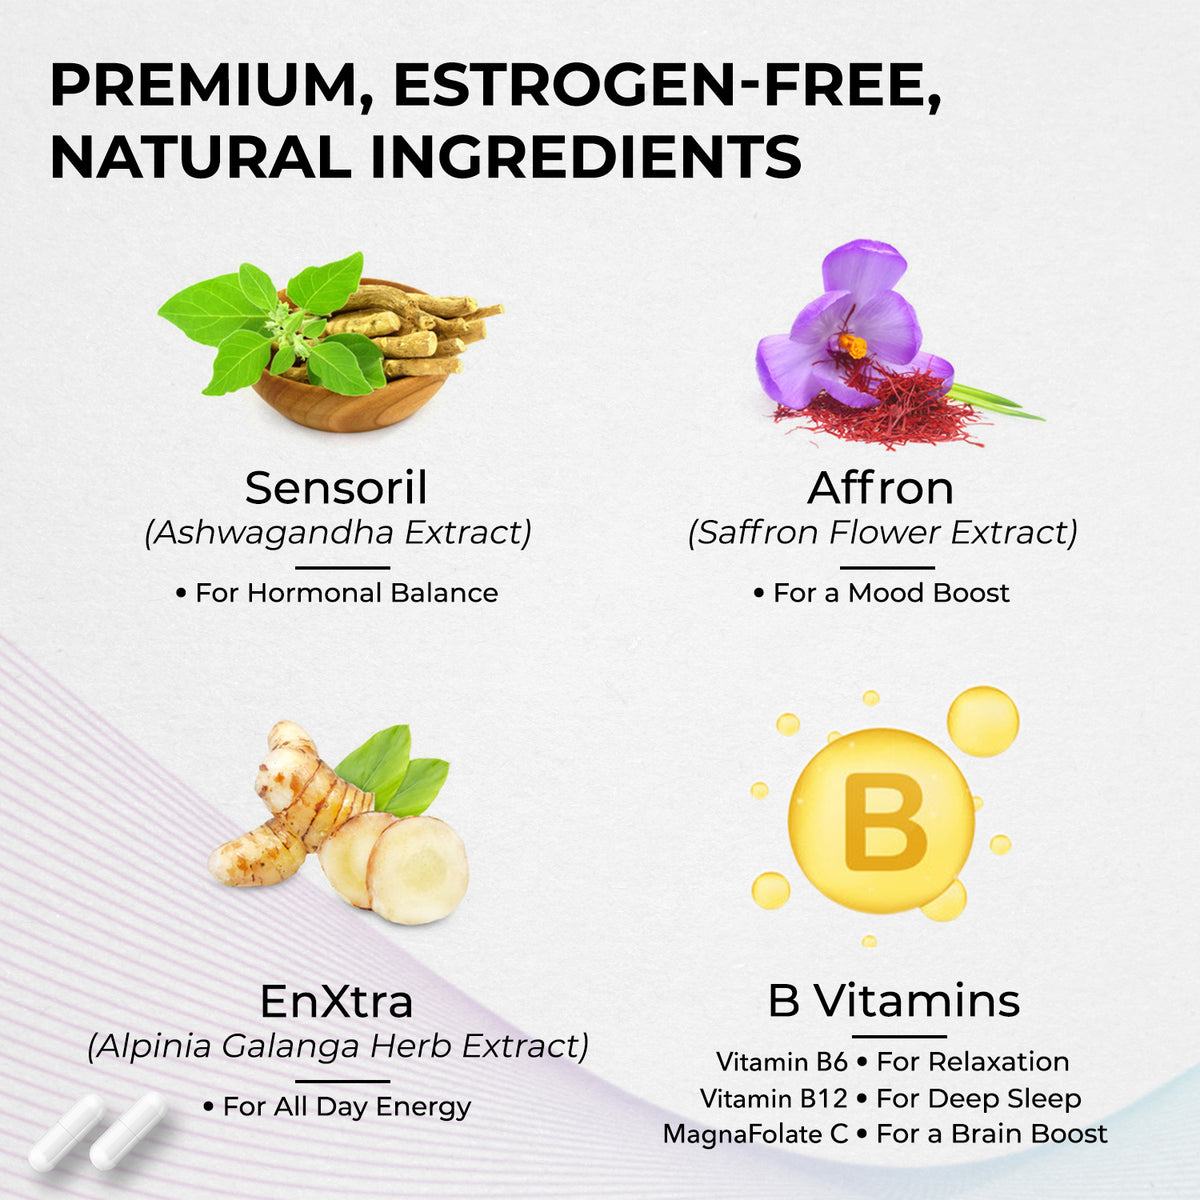 Sensoril extract, affron extract, enXtra extract, and B vitamins 